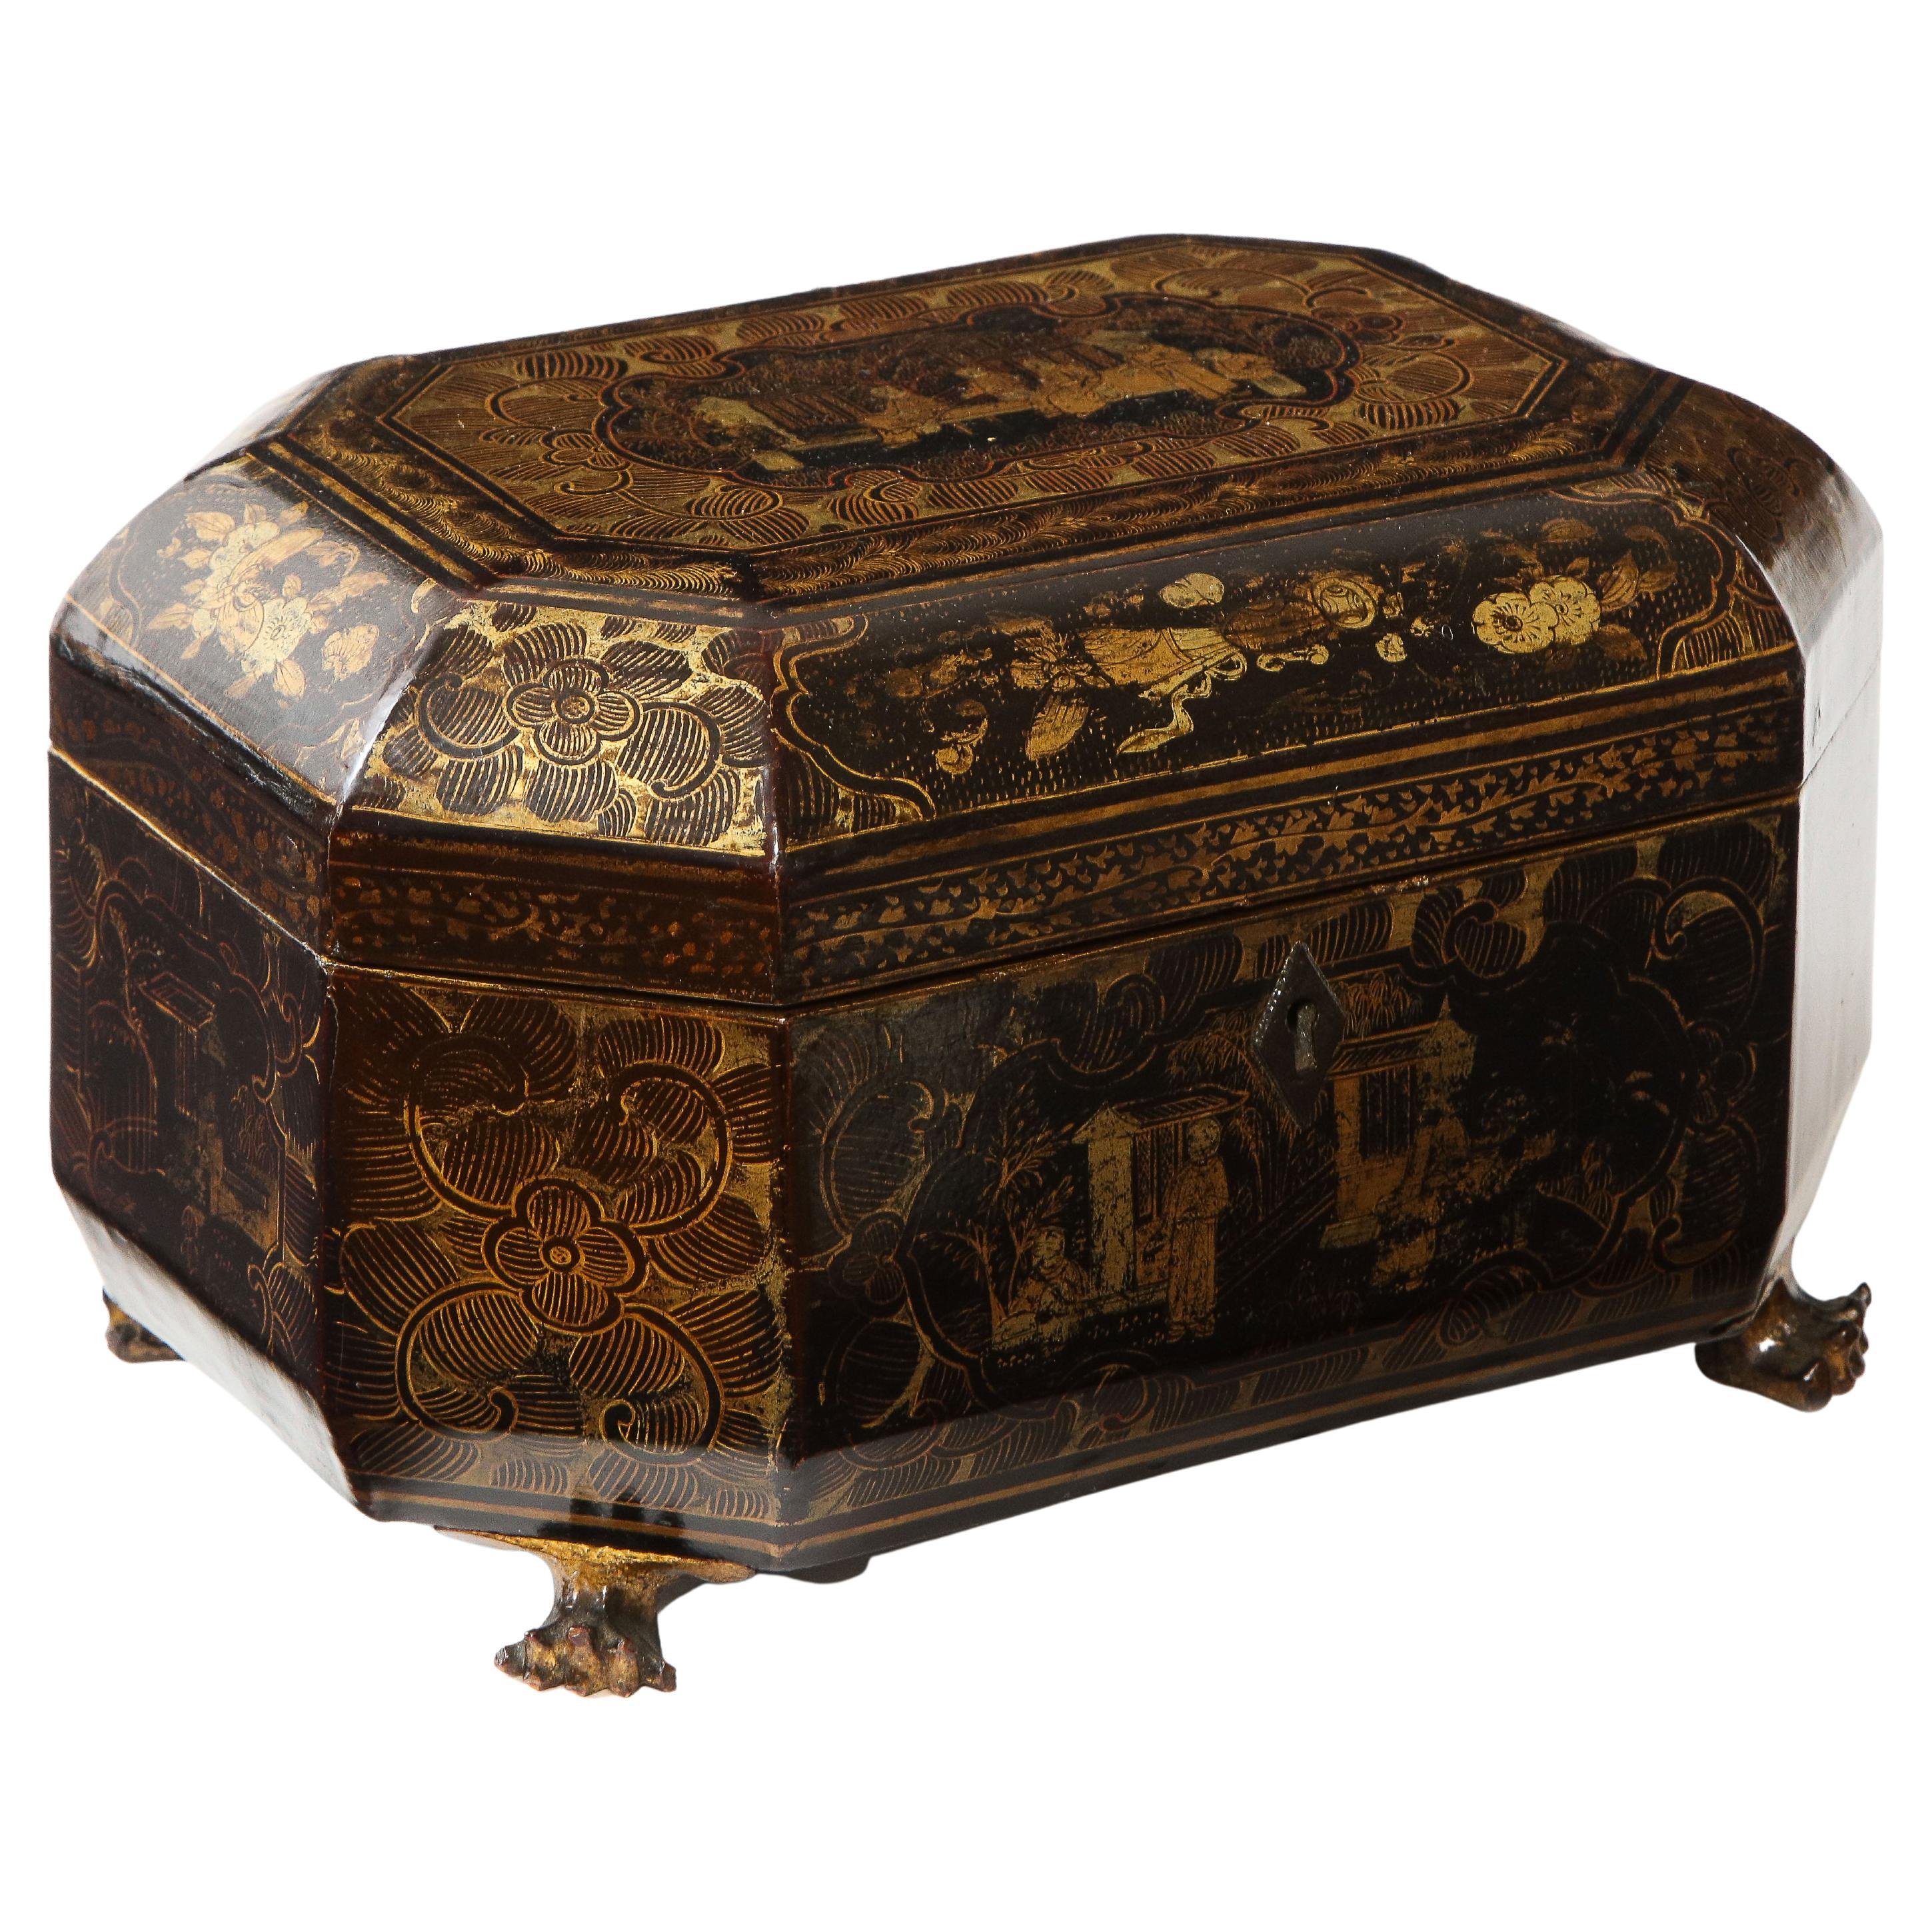 Chinese Gilt-Decorated Black Lacquer Sewing Box